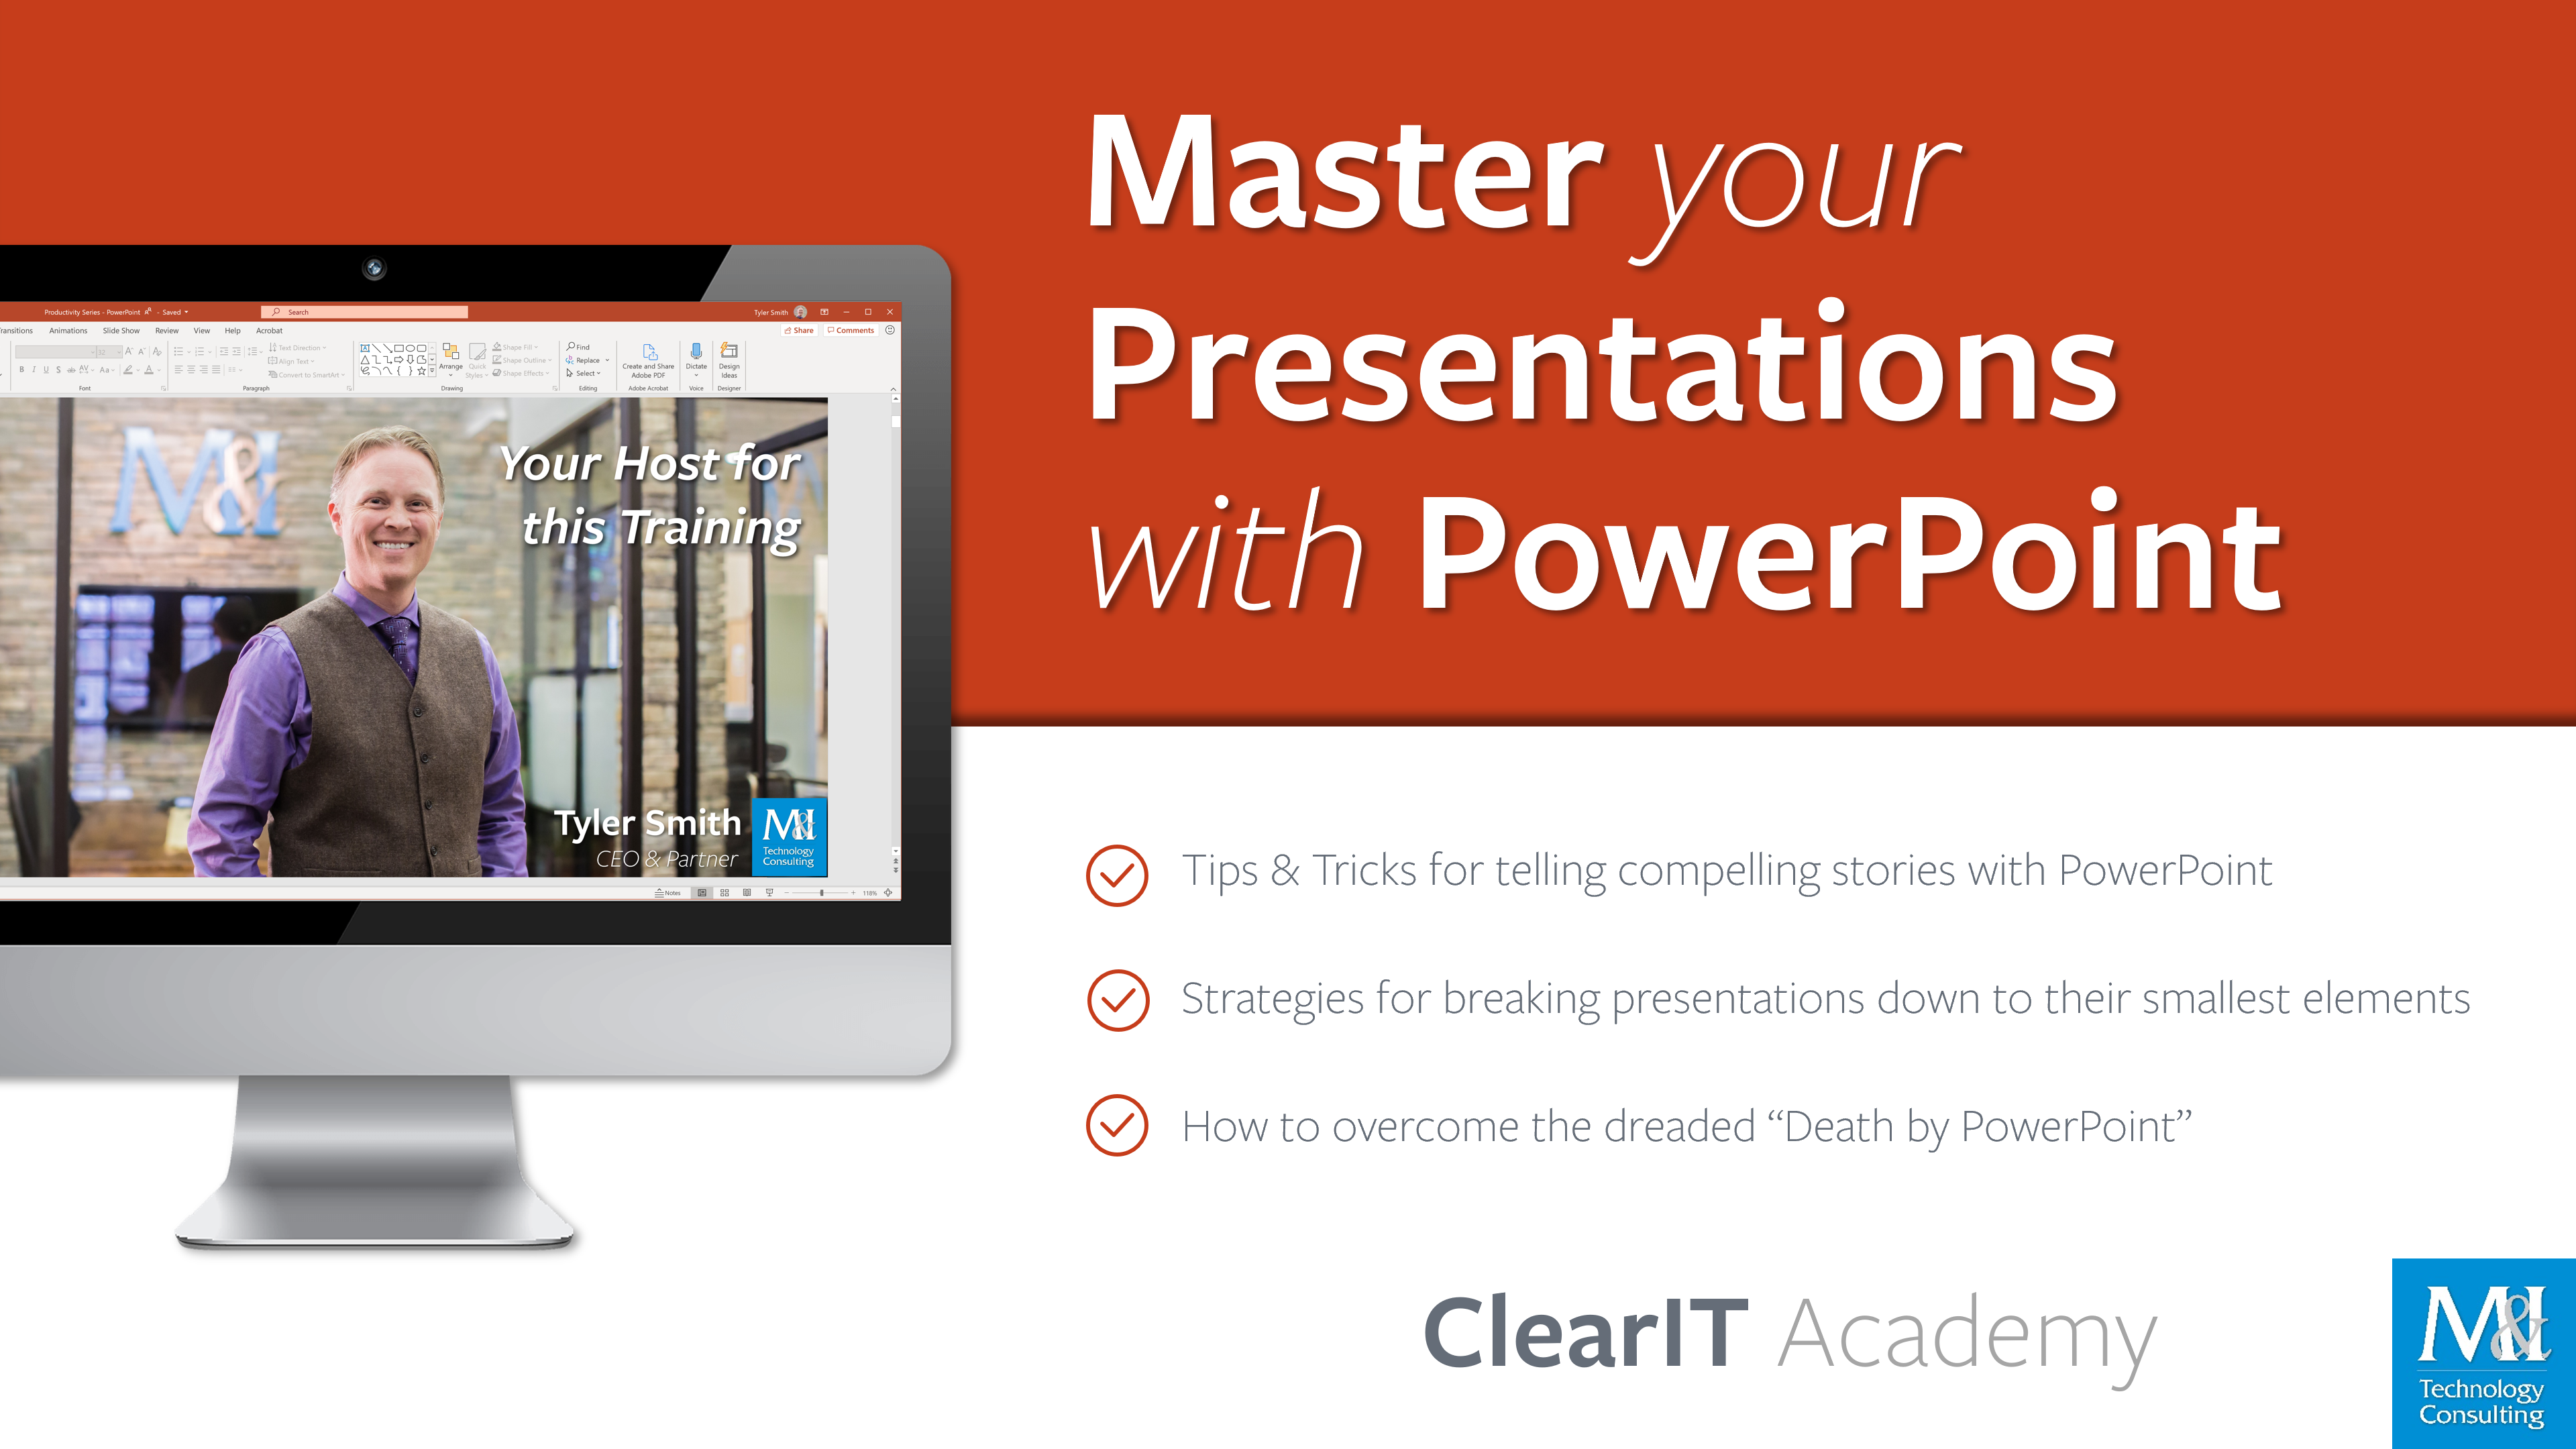 clearit-academy-powerpoint-title-slide